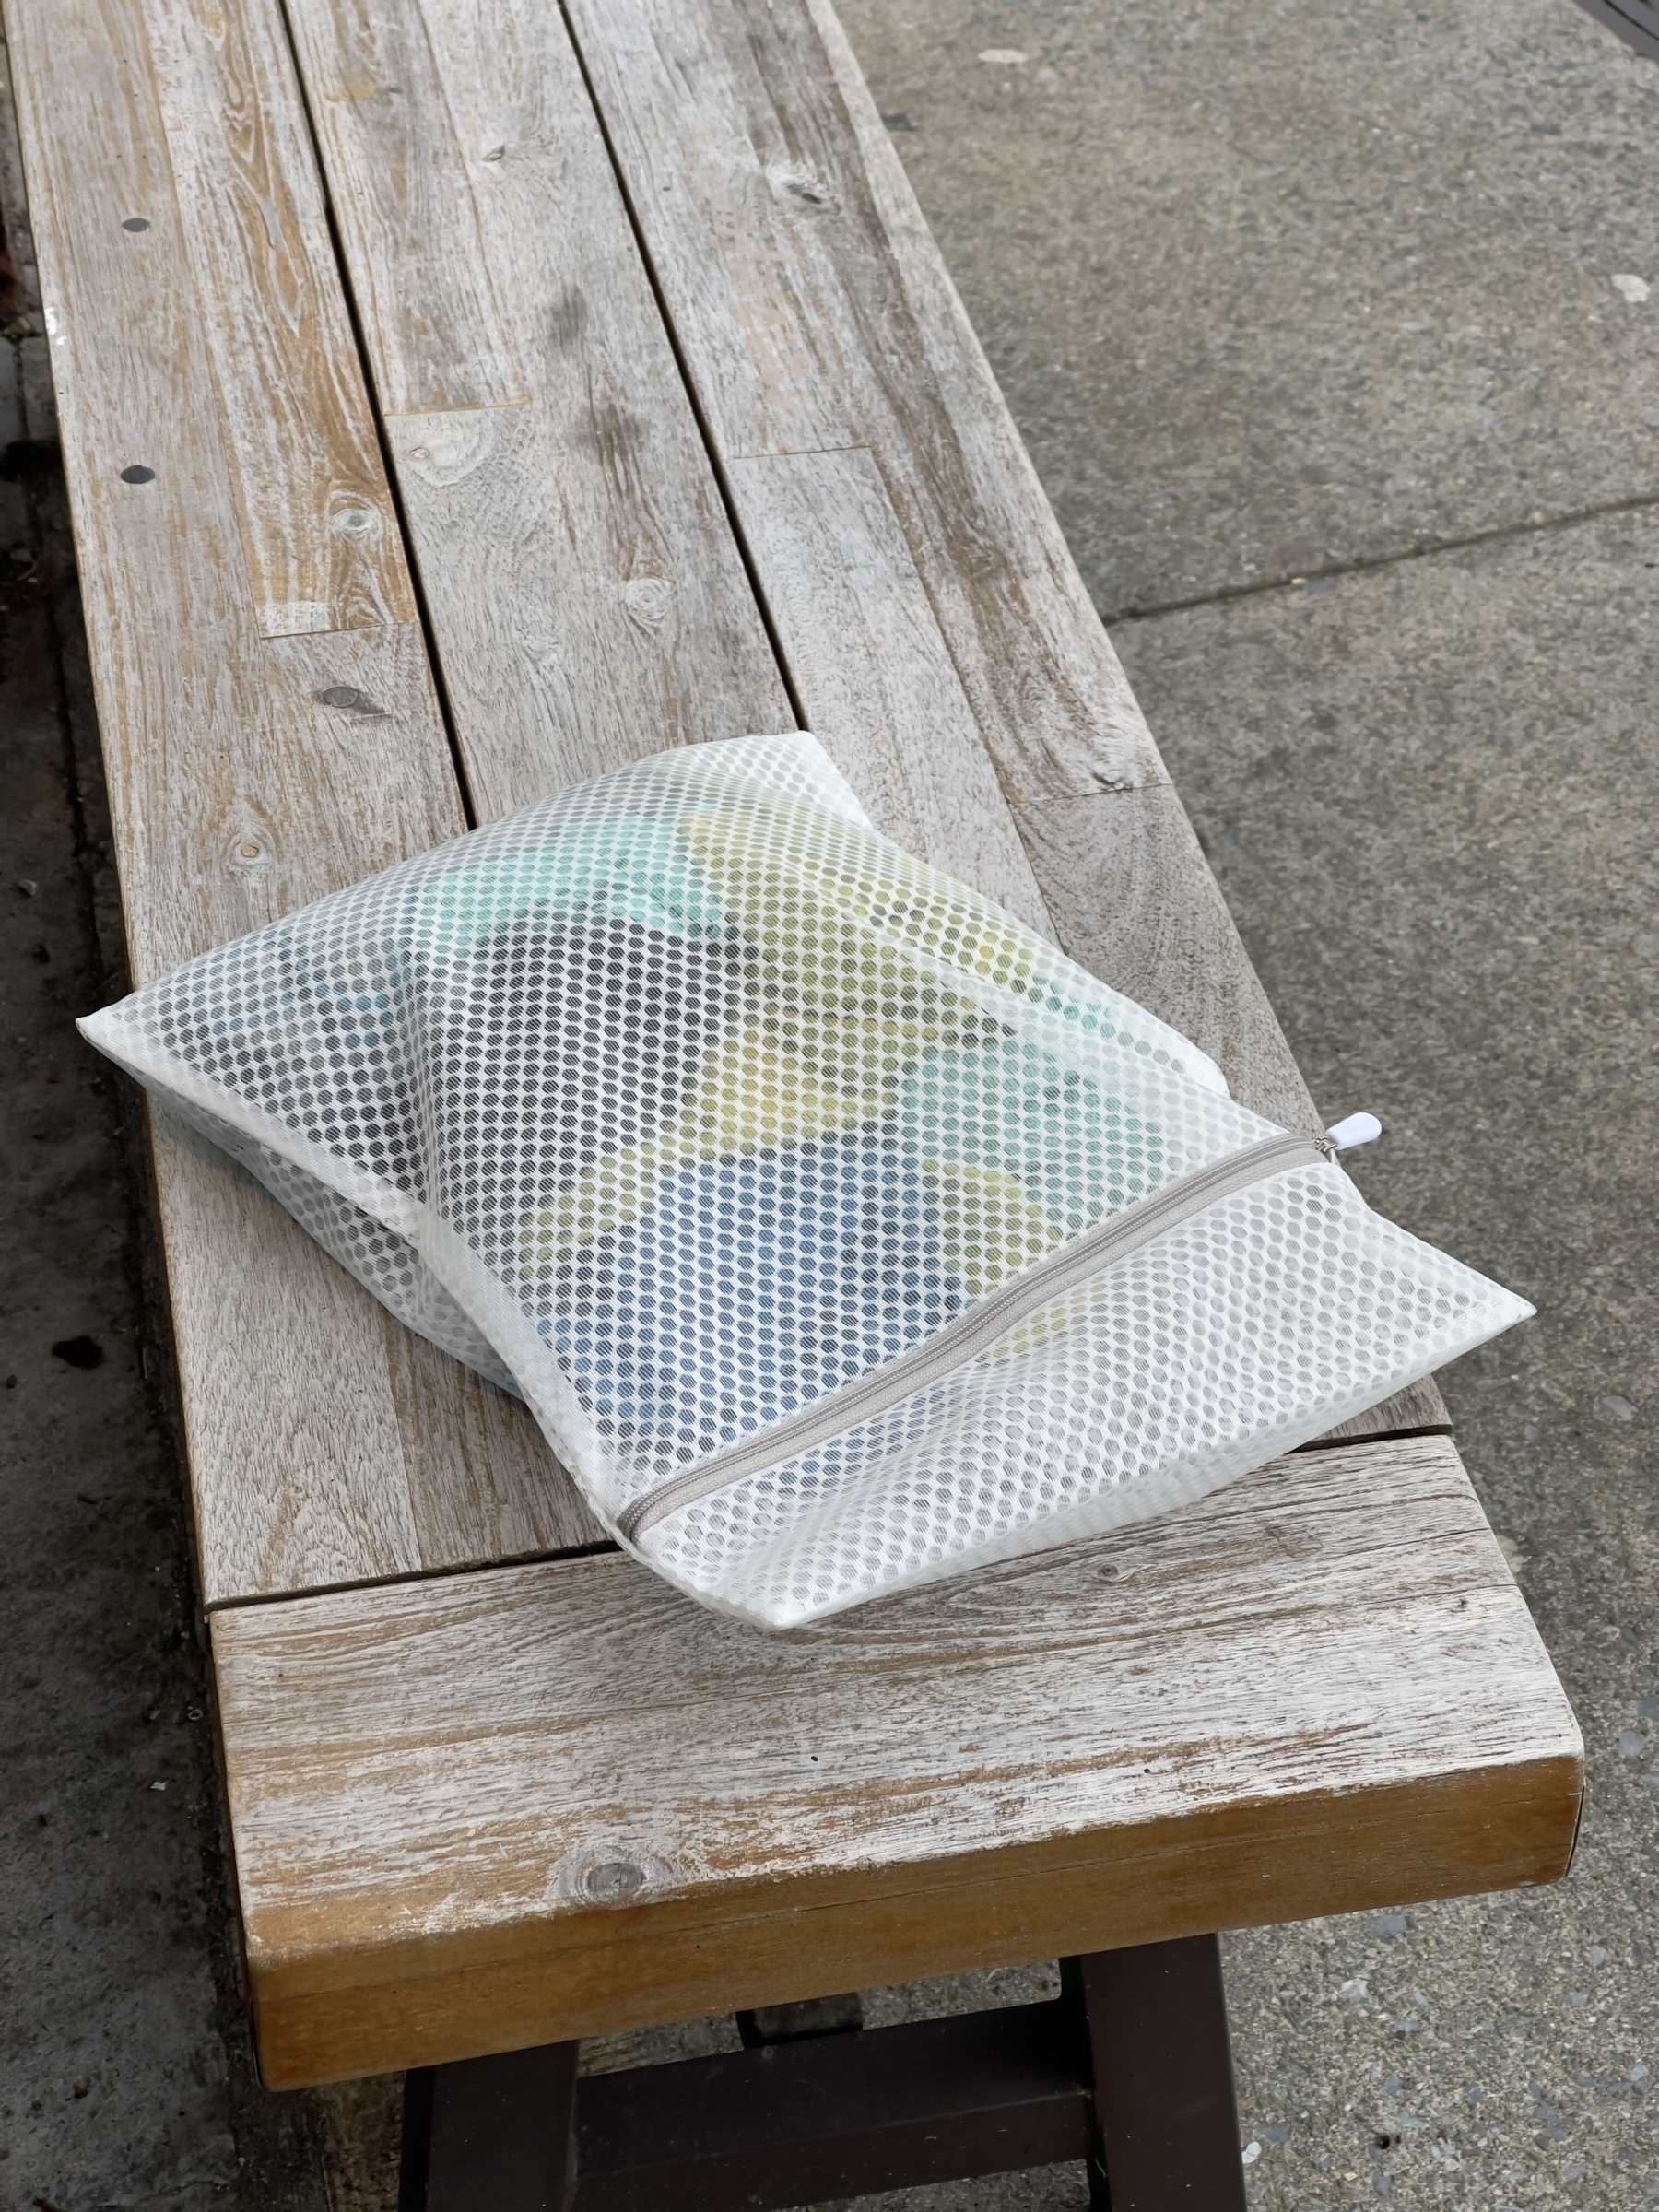 Mesh pouch with colorful things inside left on a bench.